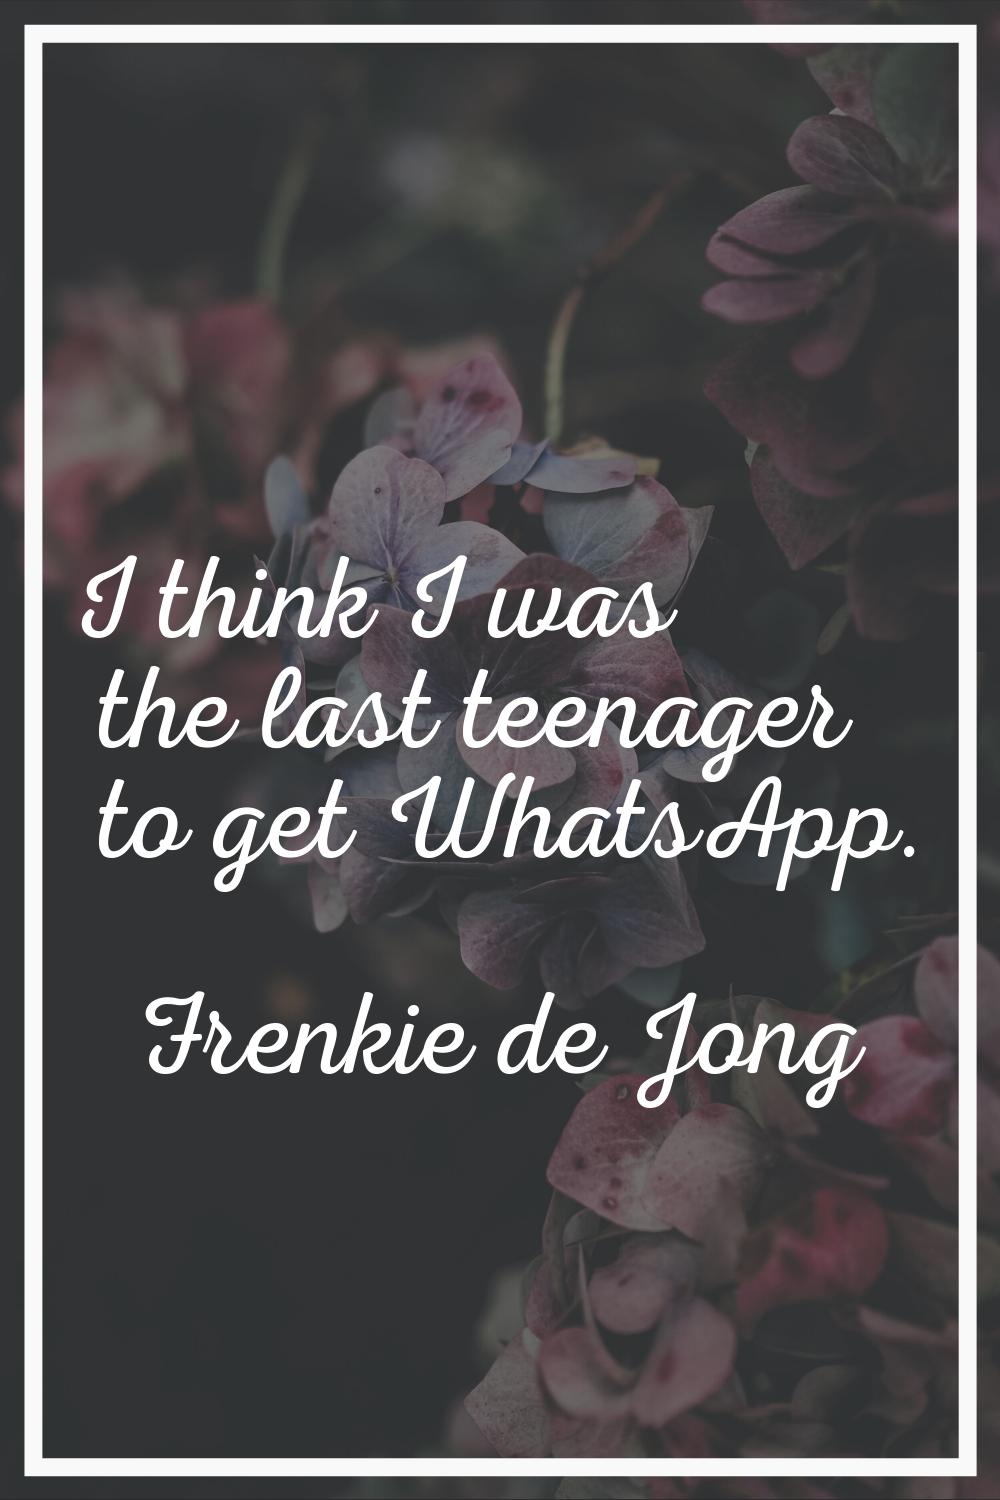 I think I was the last teenager to get WhatsApp.